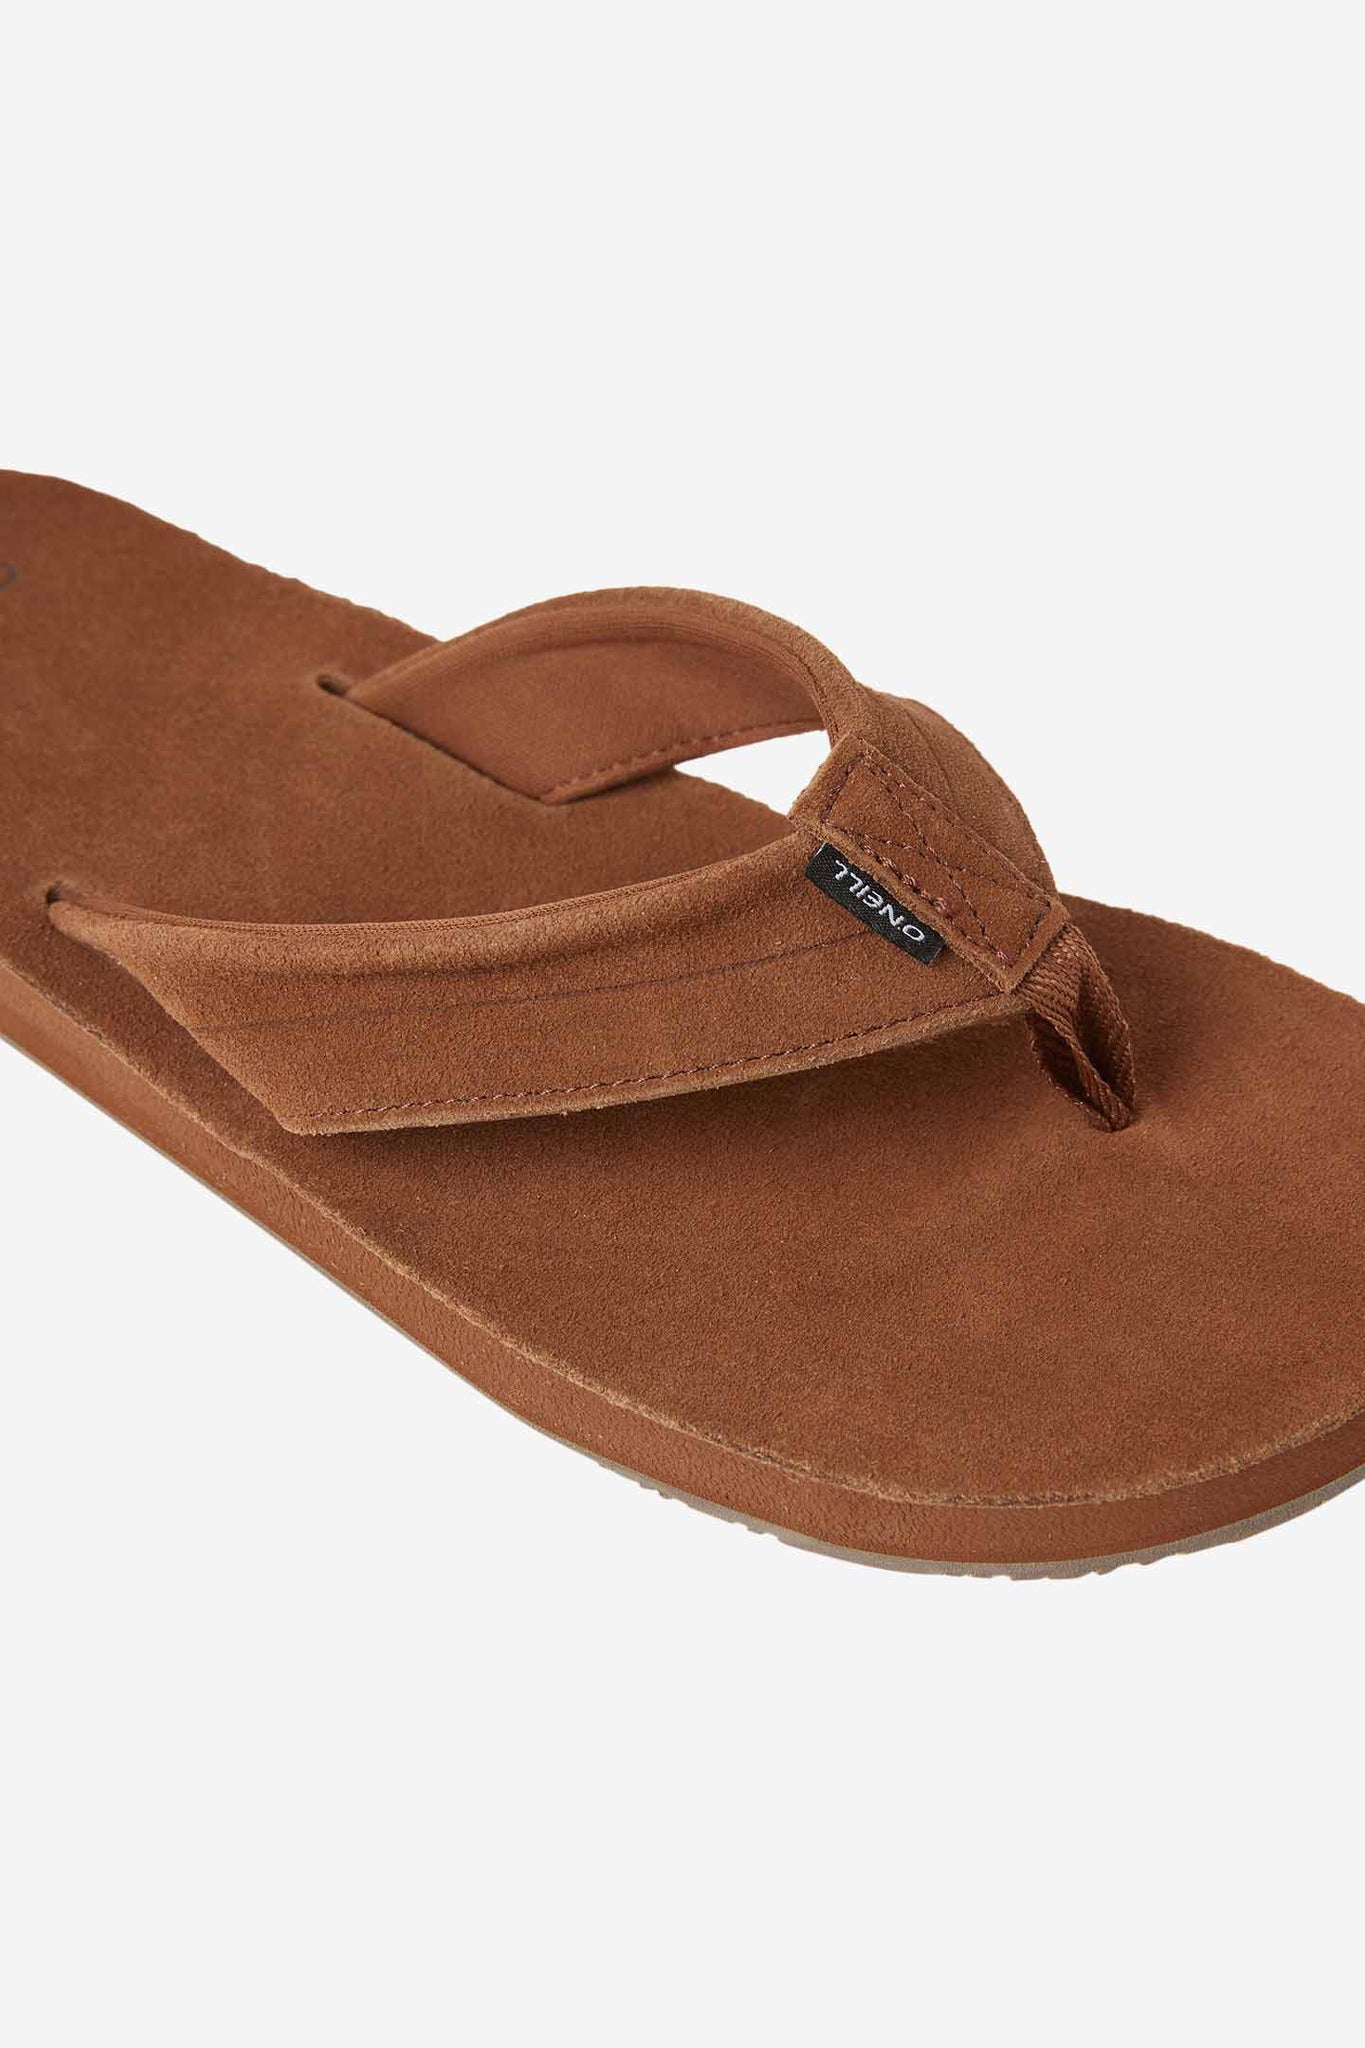 GROUNDSWELL SANDALS